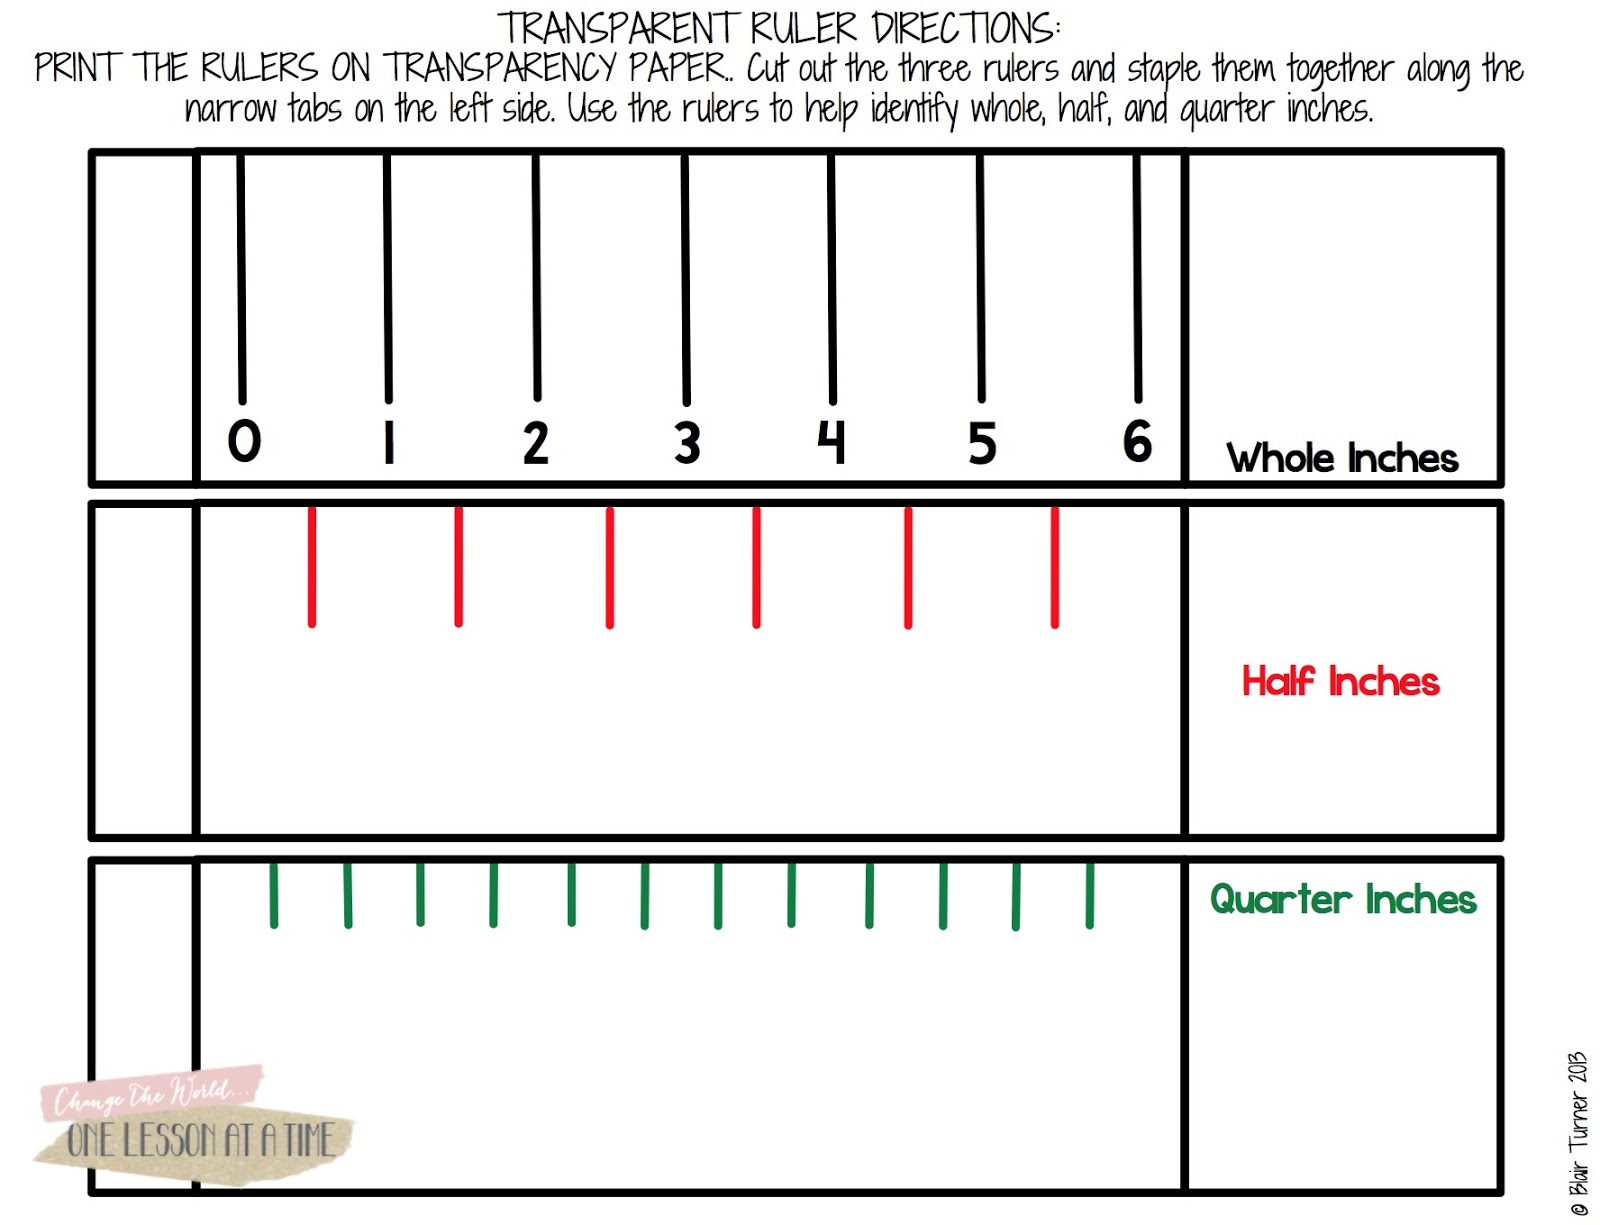 DIY Transparent Ruler - Freebie Included! Print this on